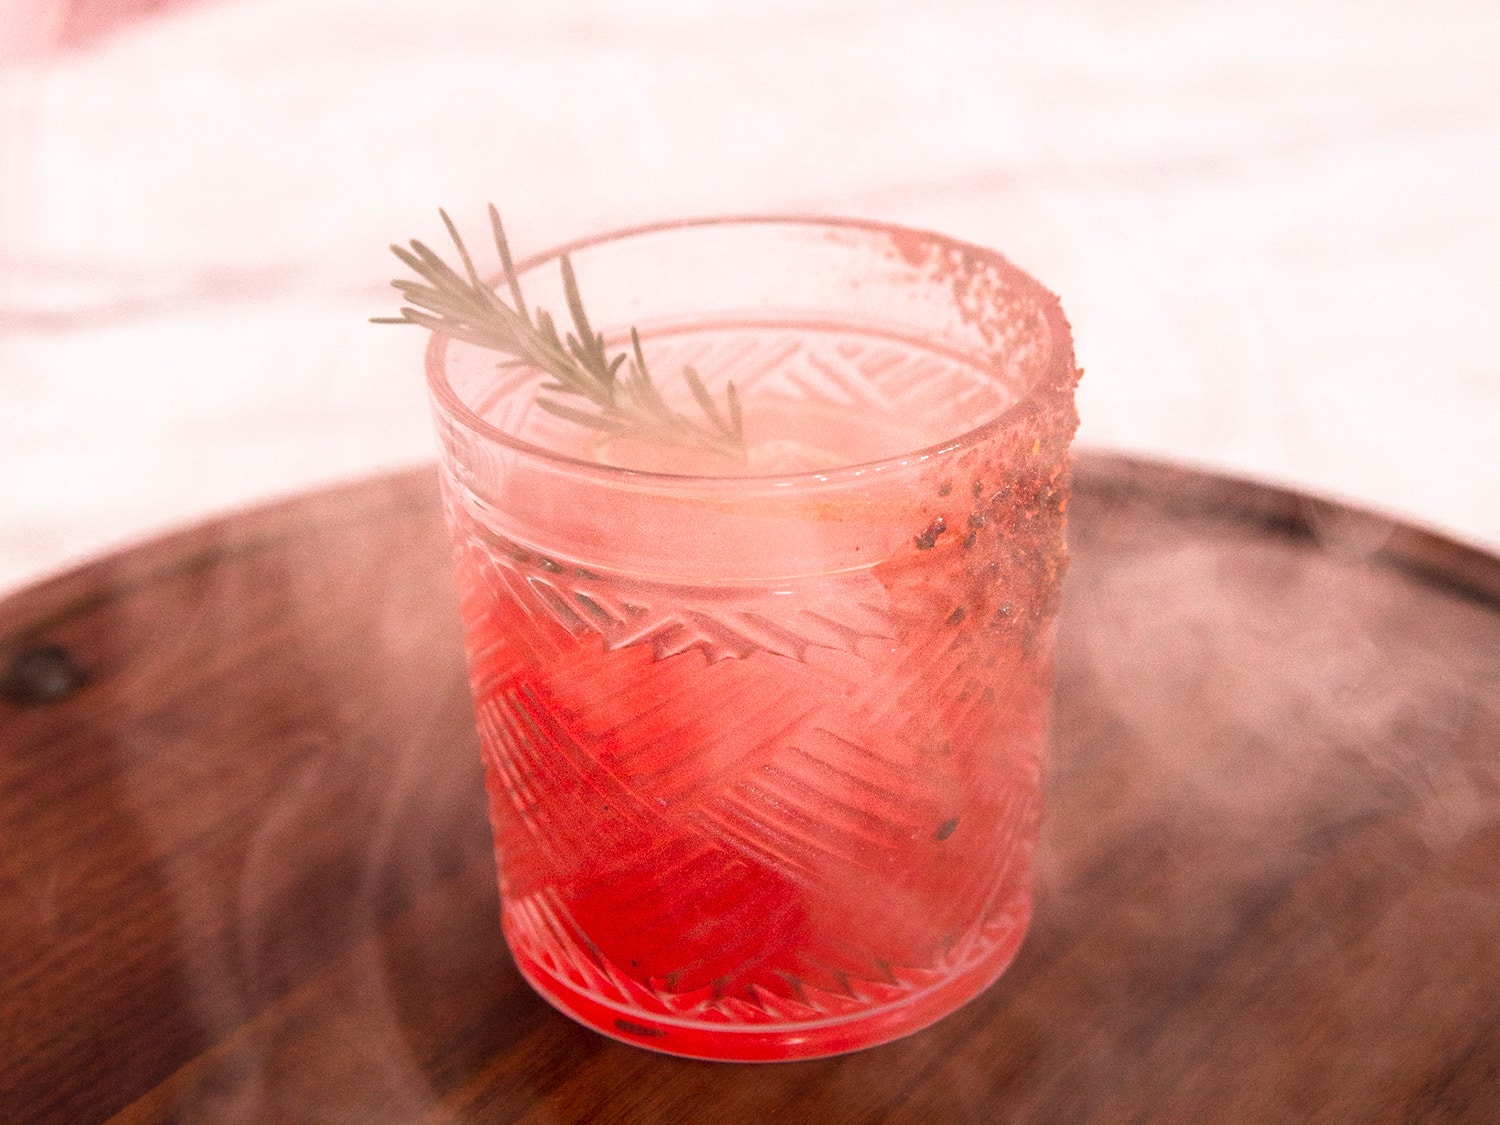 The Smoked Blood Orange Margarita from the dinner pop-up concept Amiga Amore in Los Angeles, California.